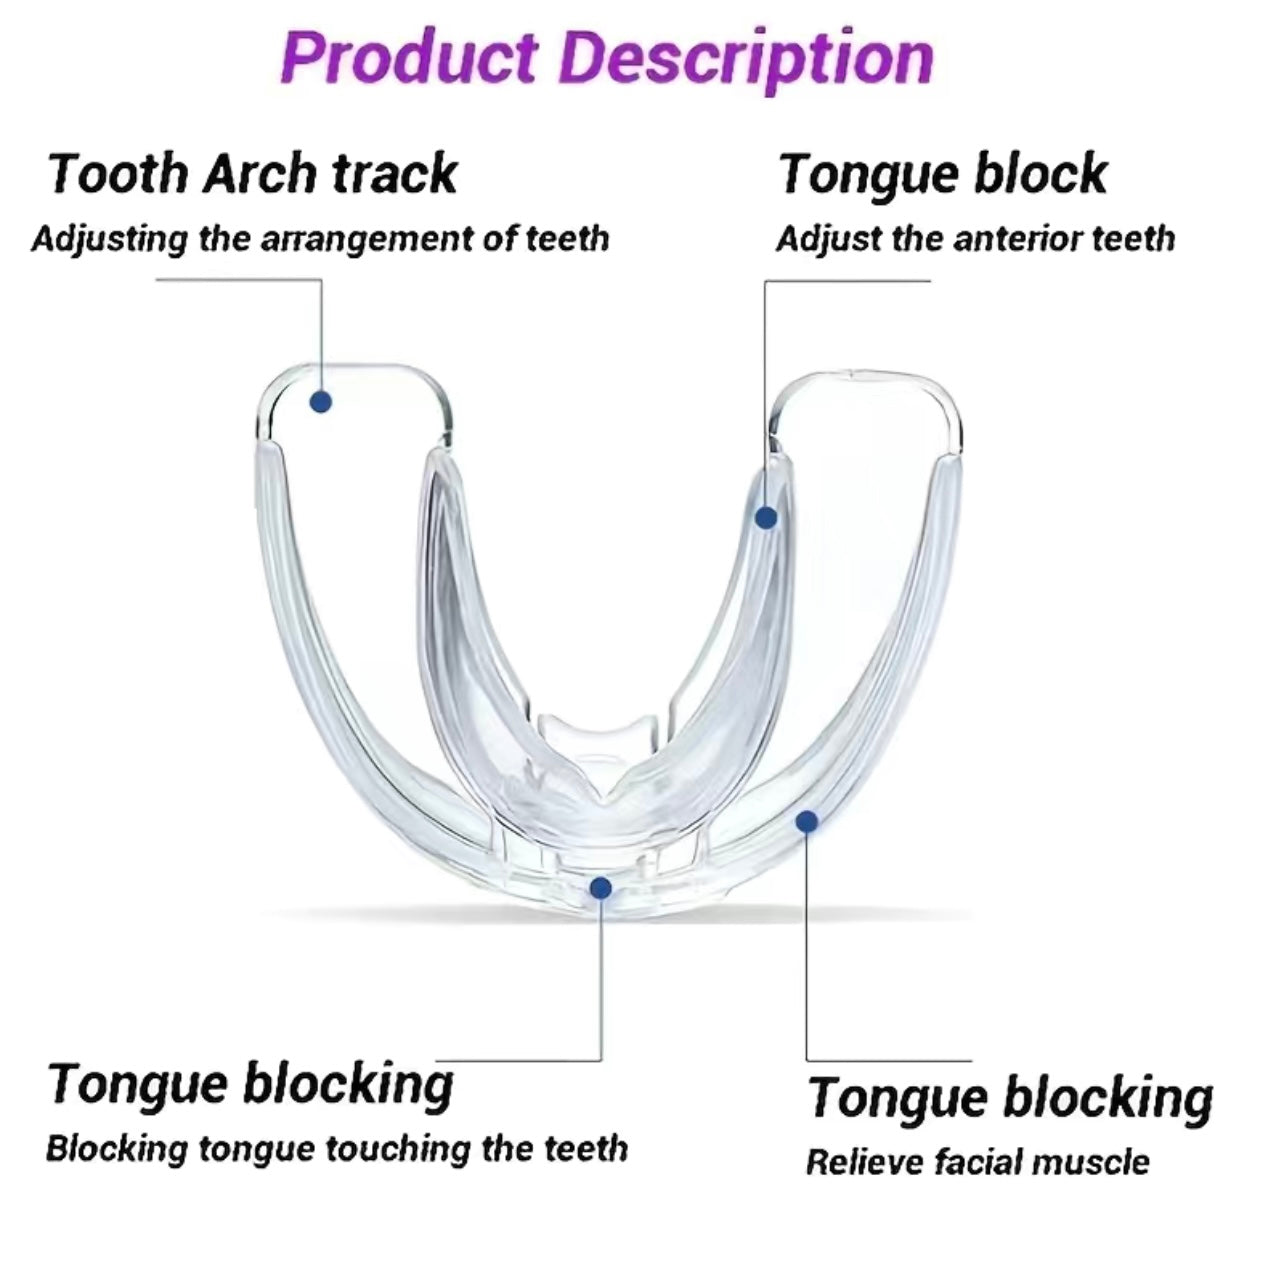 3 Stage Overnight Teeth Aligners - the 3 Phase Night Guard Braces! At home braces. Teeth aligners overnight. Mouth guard. Straighten teeth naturally. Straighten teeth without braces. Veneers. TikTok Viral products. TikTok made me buy it. TikTok famous items.